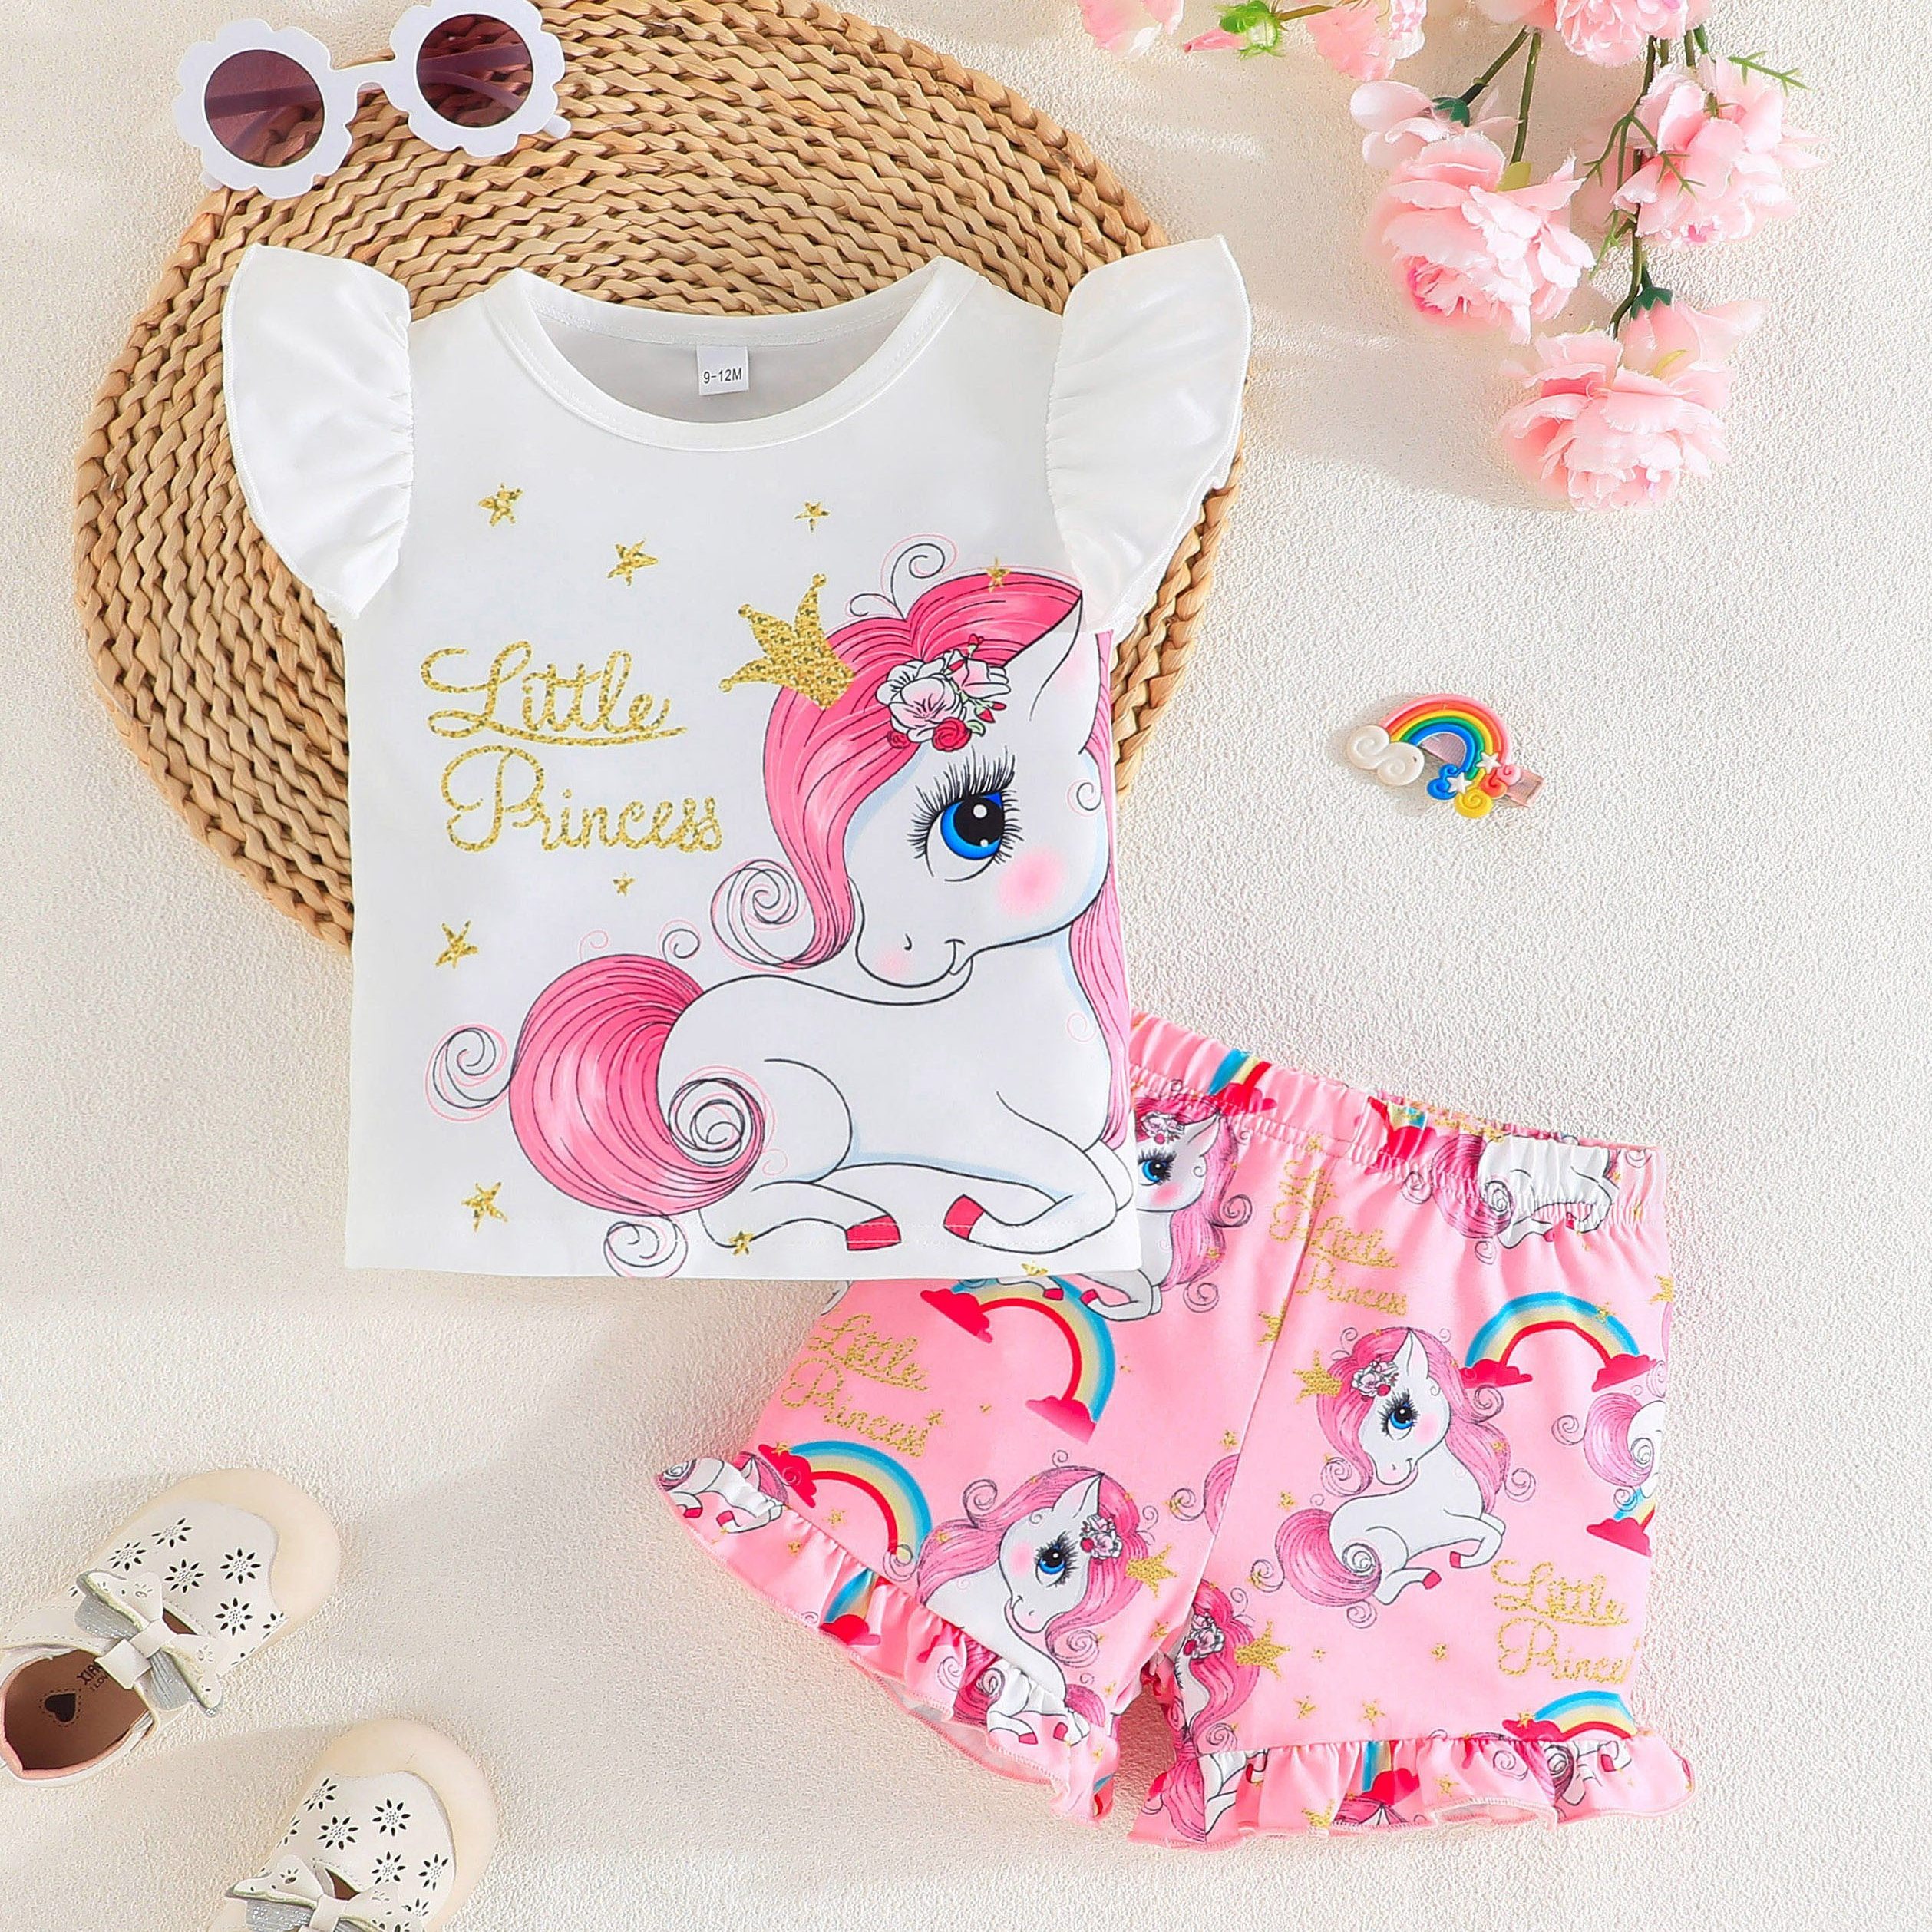 

2pcs Infant & Toddler's Cute Unicorn Print Lovely Outfit, Cap Sleeve Top & Ruffle Trim Shorts, Baby Girl's Clothes